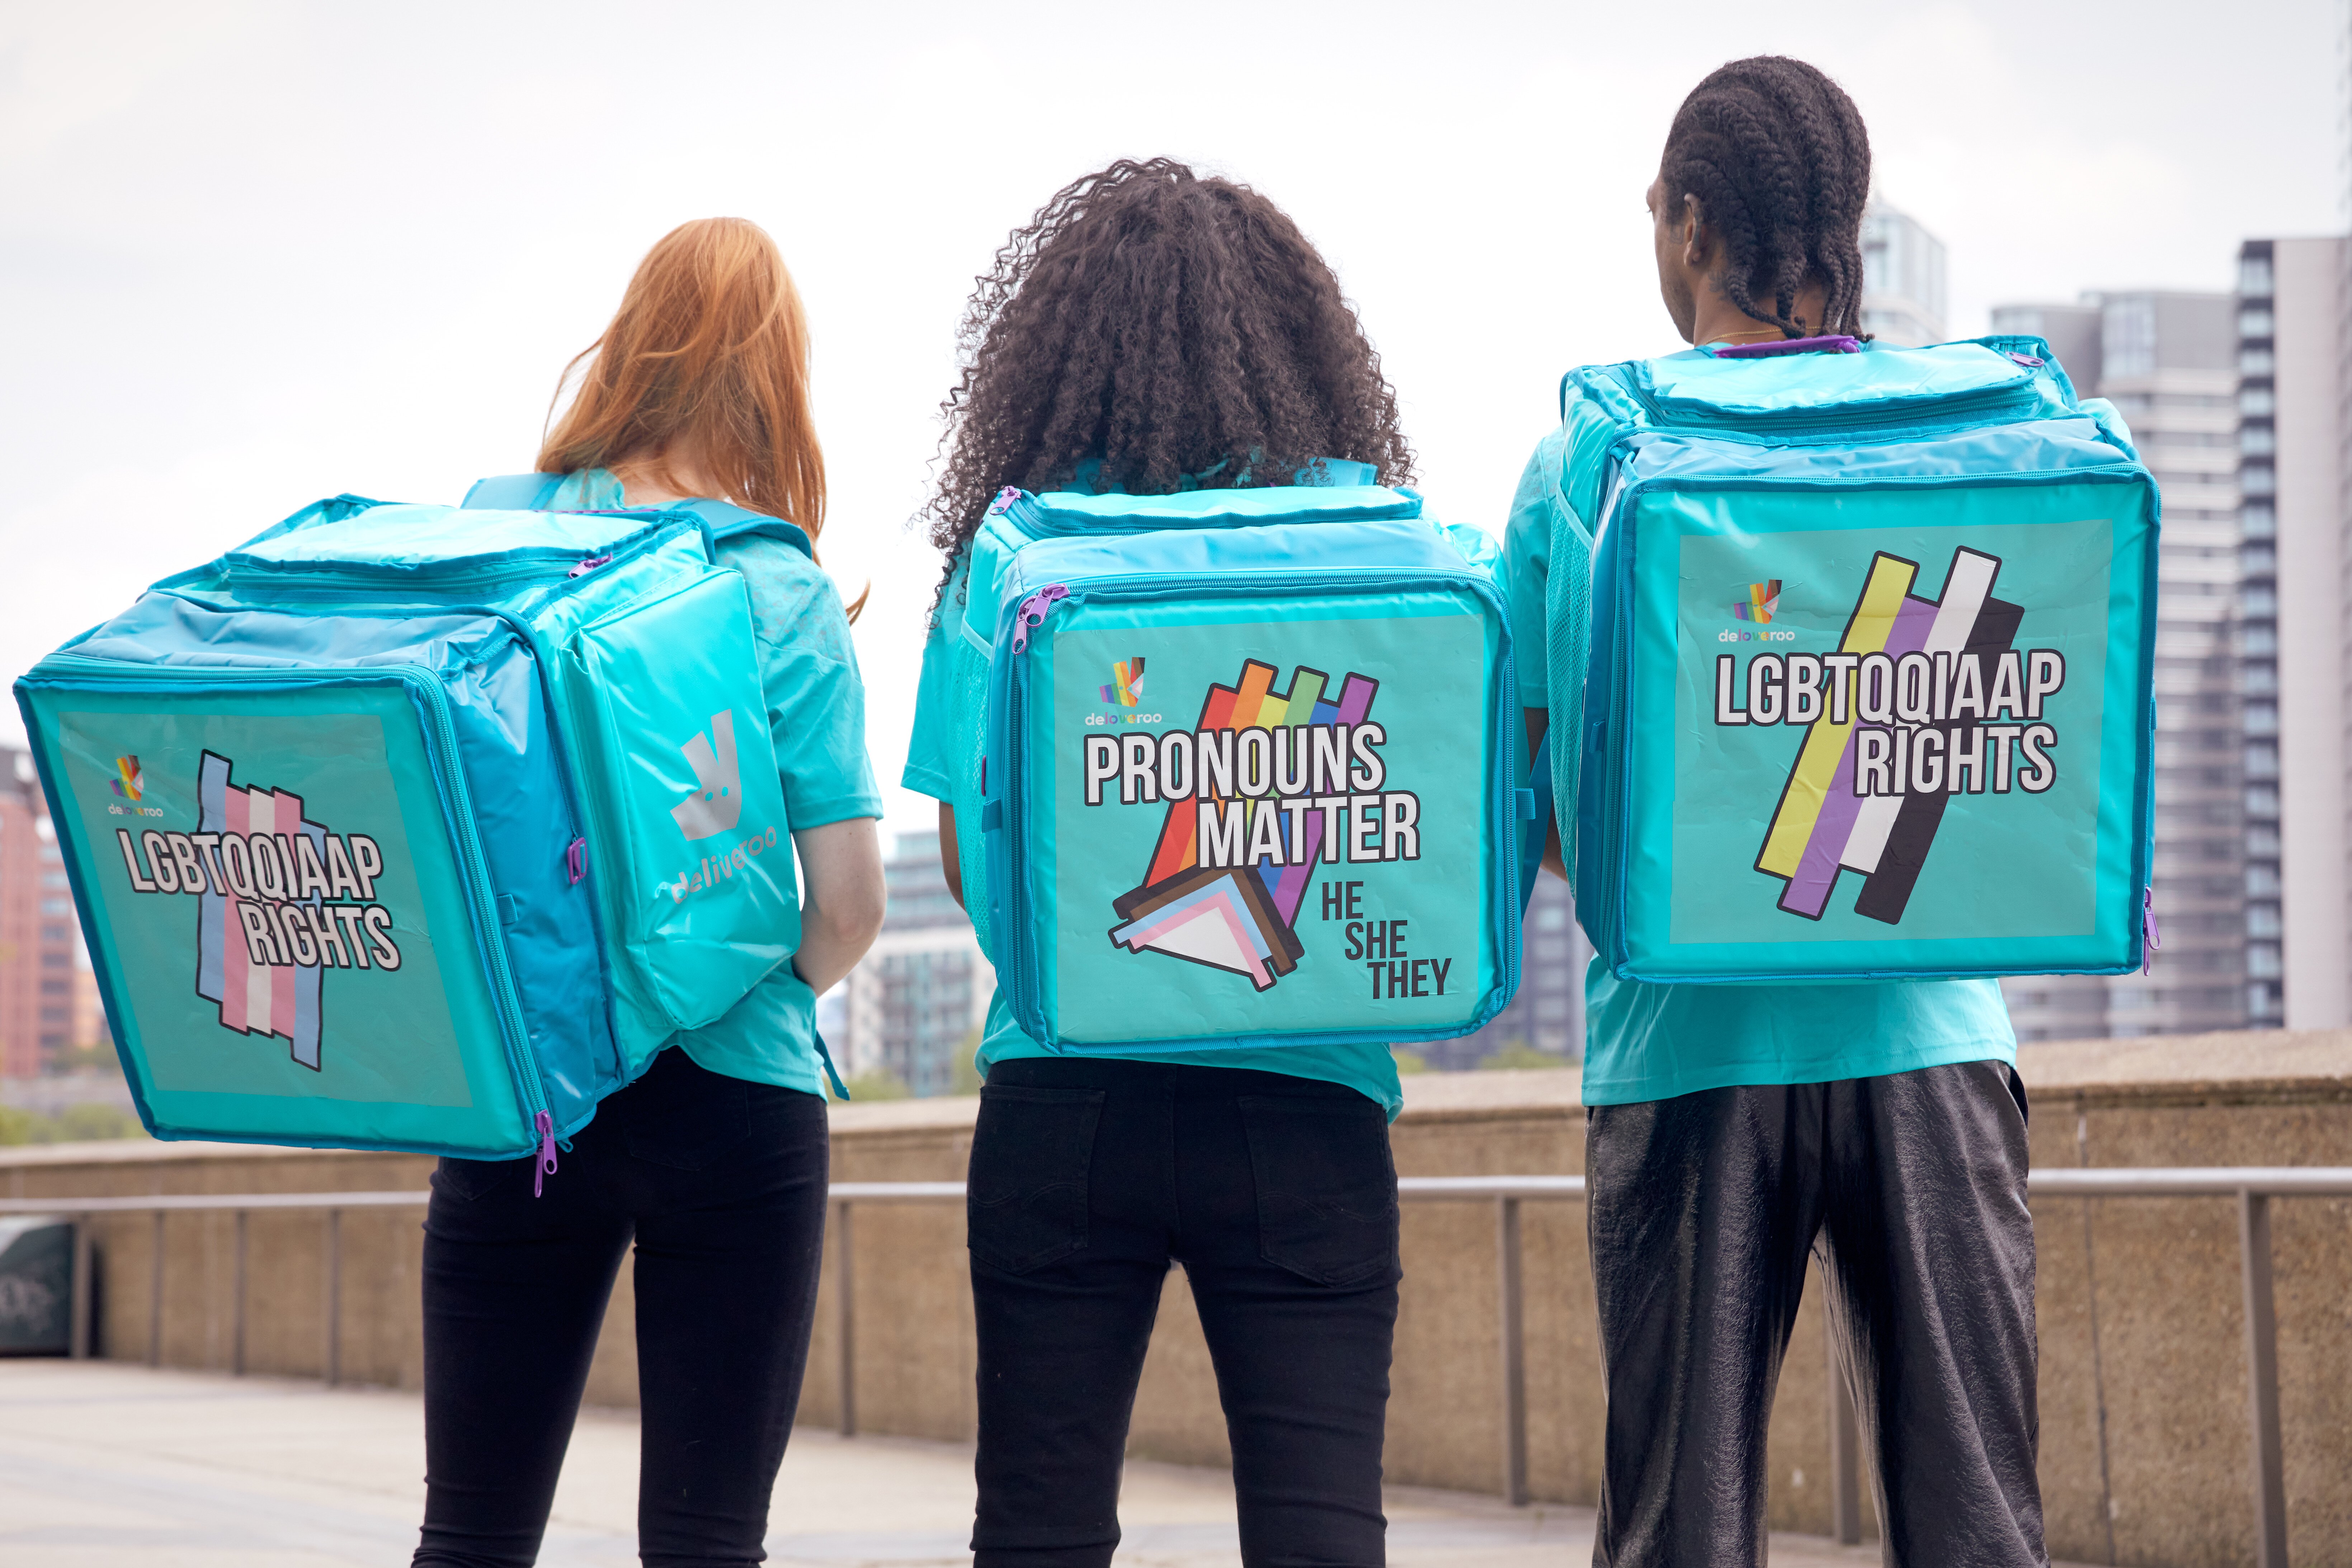 Deliveroo launches ‘pronouns matter’ bags for Pride along with inclusion initiatives